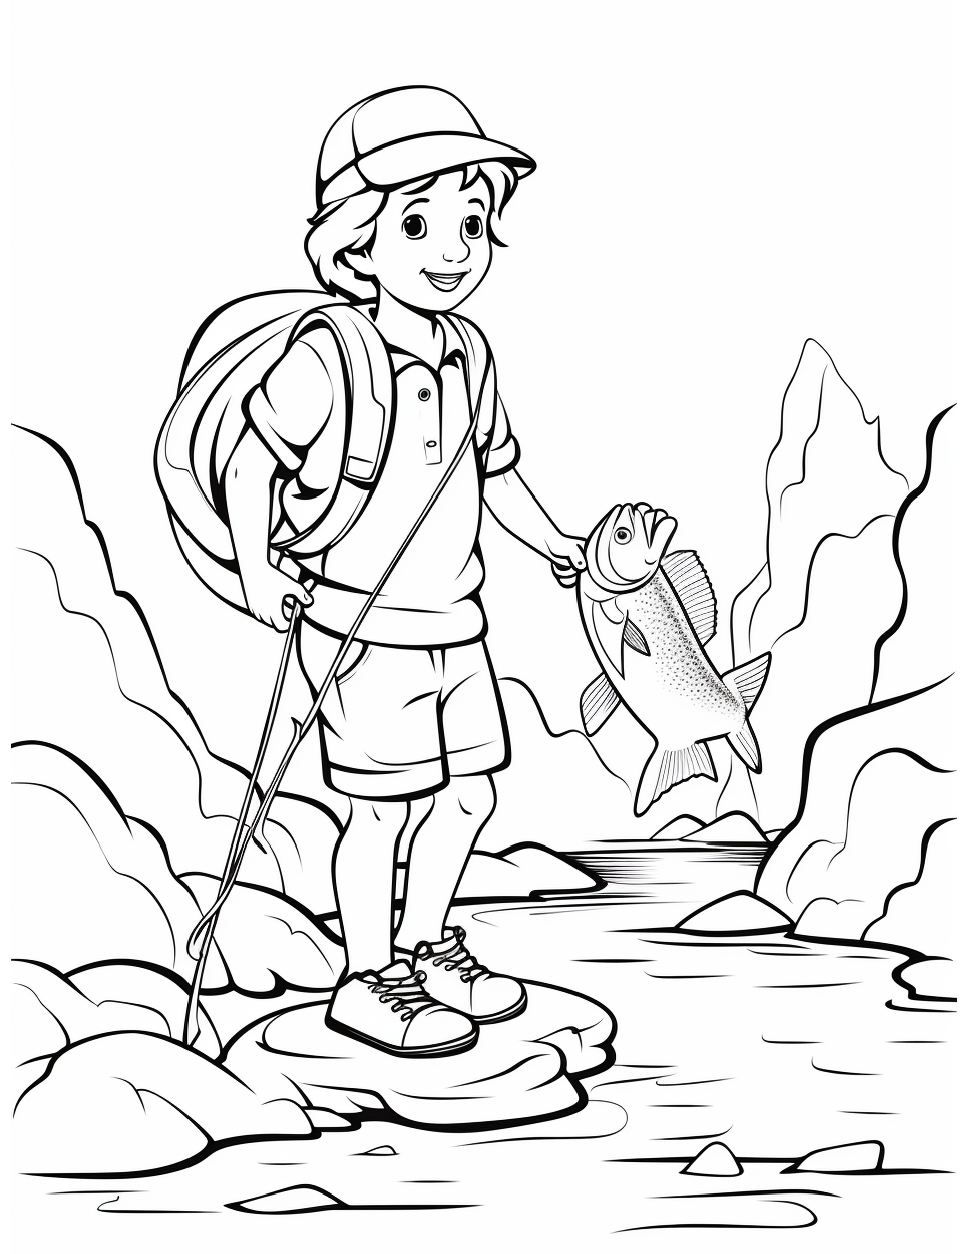 Fishing Coloring Page 11 - Line drawing of a boy with a backpack, holding a fishing rod and a fish